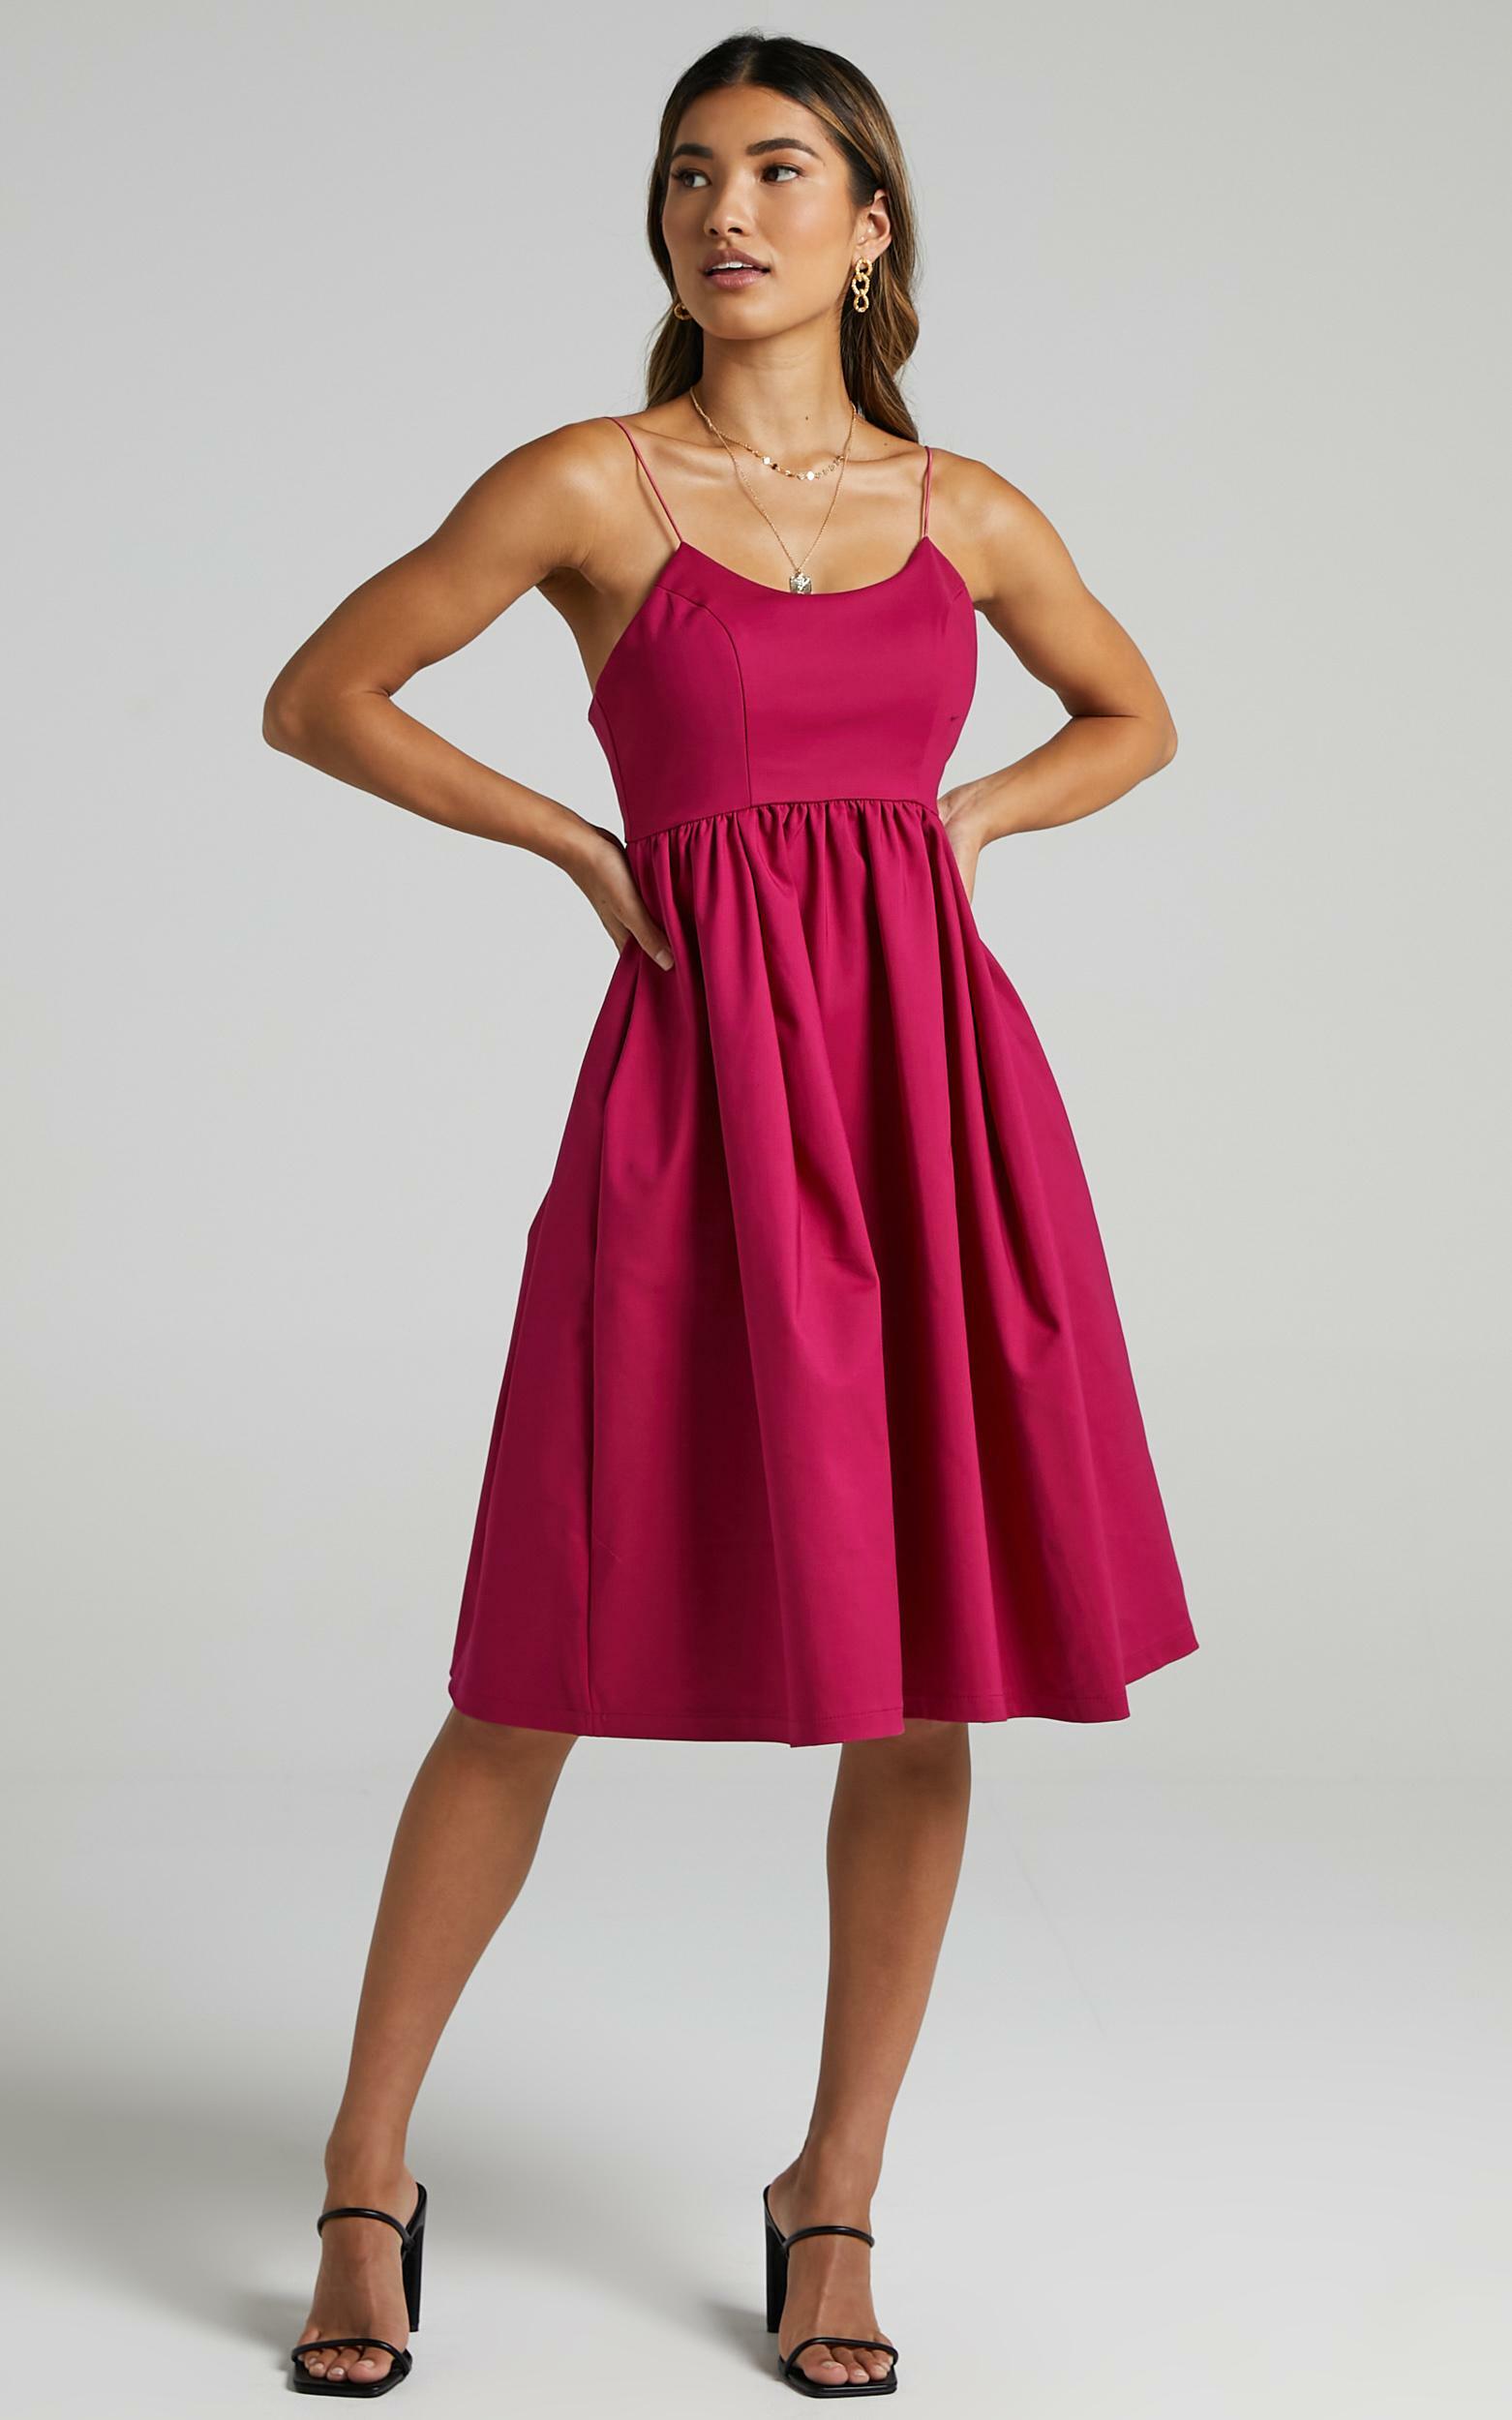 Wild Nights A-line Spaghetti Strap Dress in Magenta - 06, PRP7, hi-res image number null